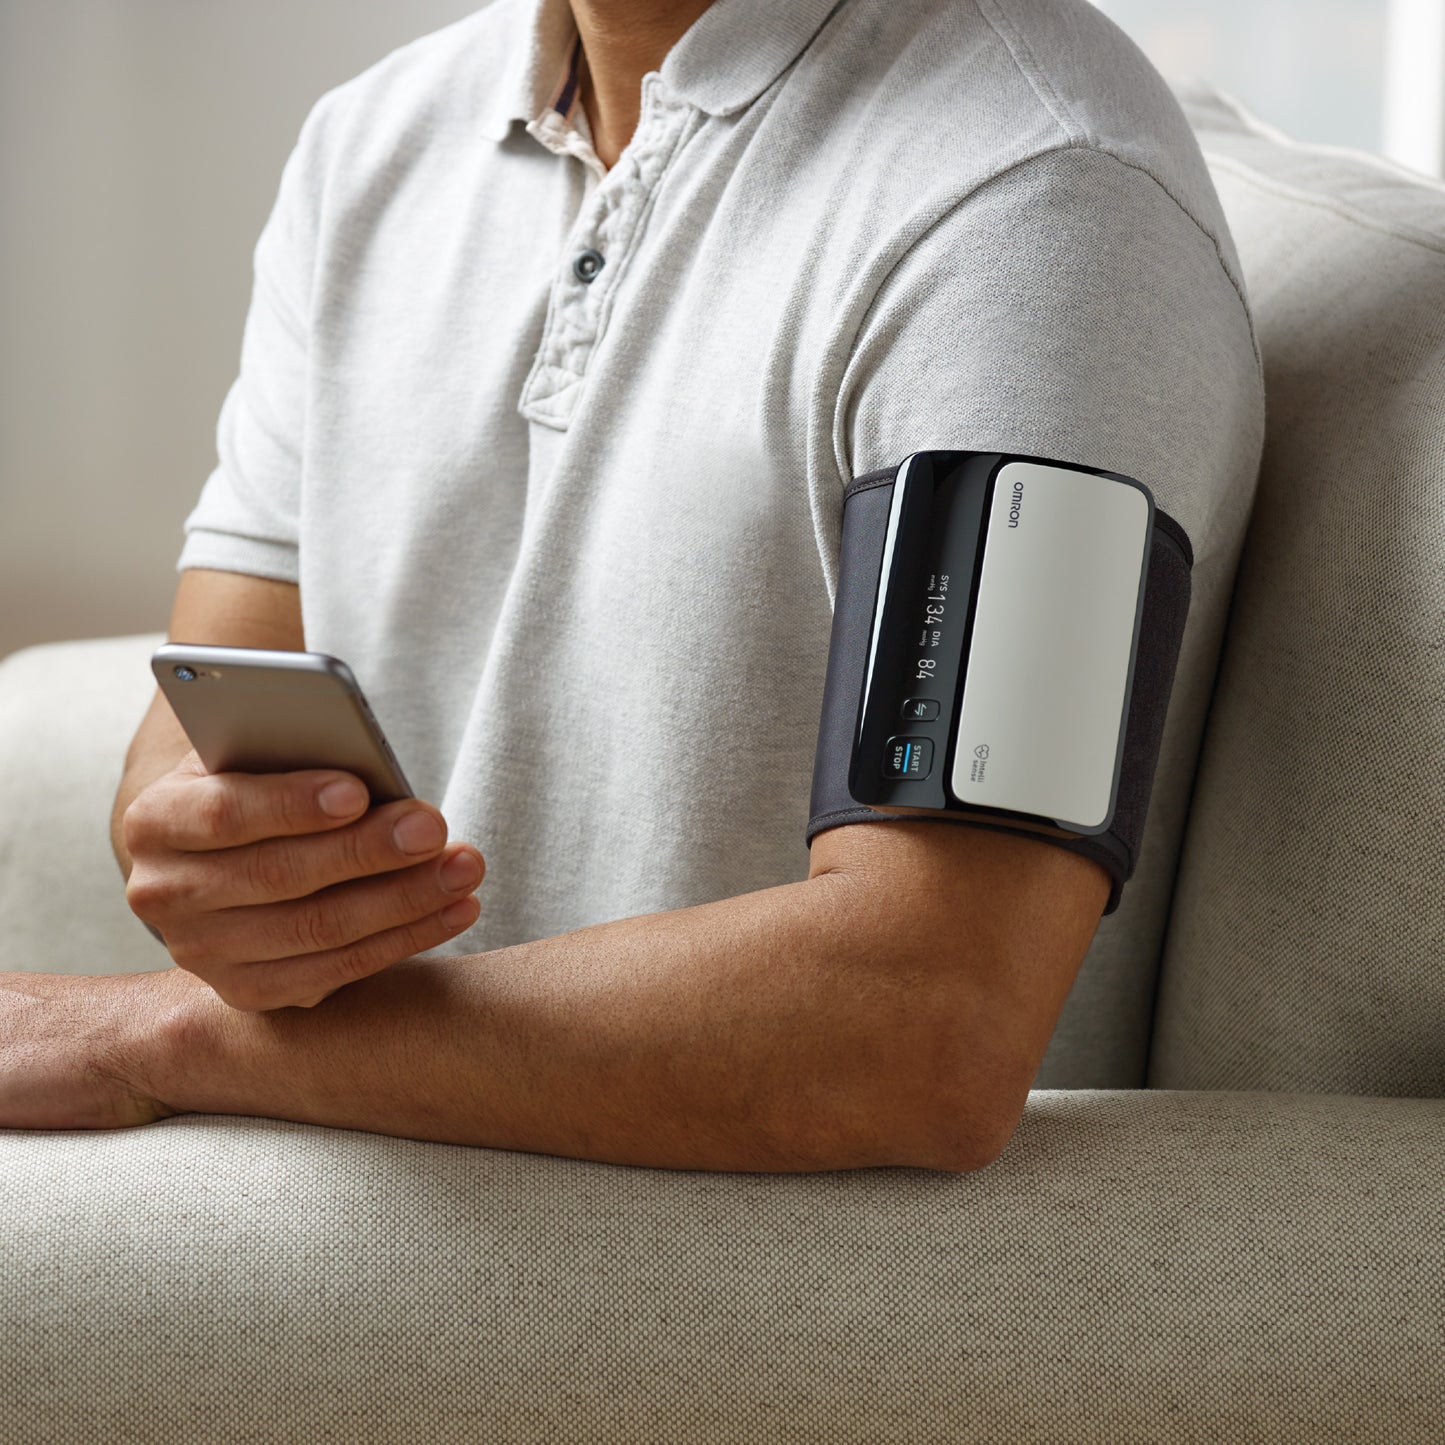 Wireless blood pressure monitor transmits reading to smartphone